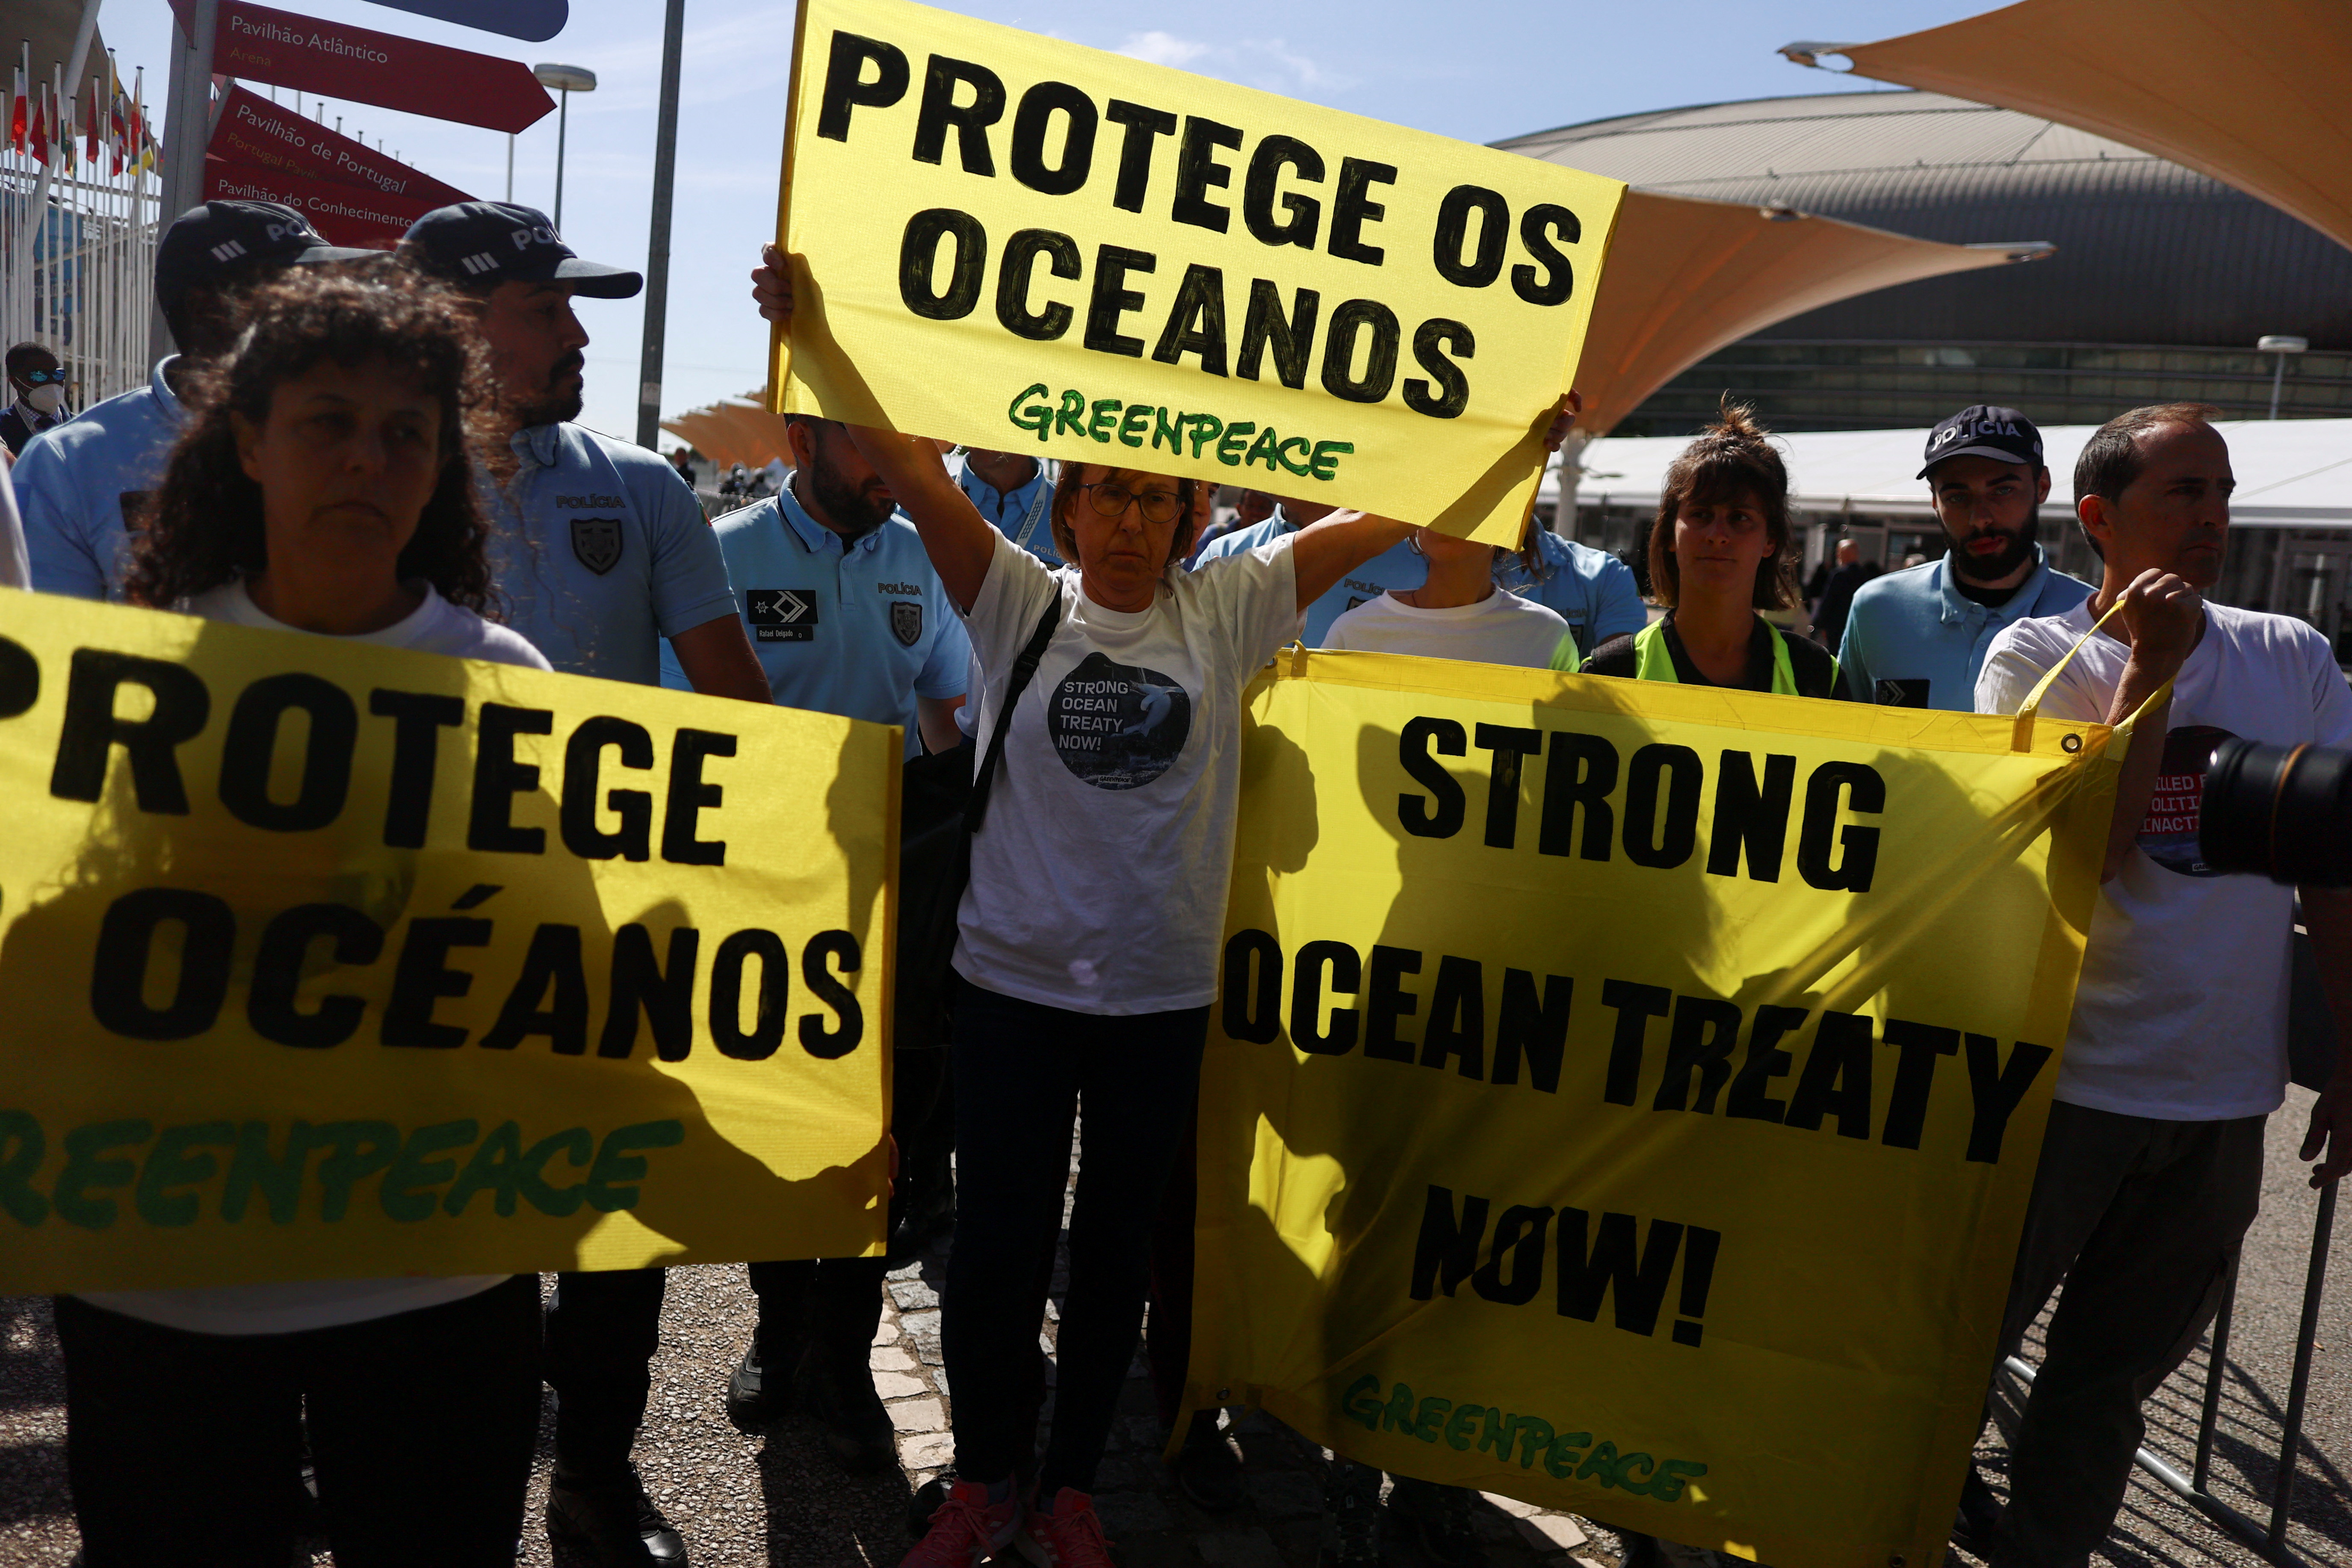 Greenpeace activists demonstrate outside the U.N. Ocean Conference in Lisbon